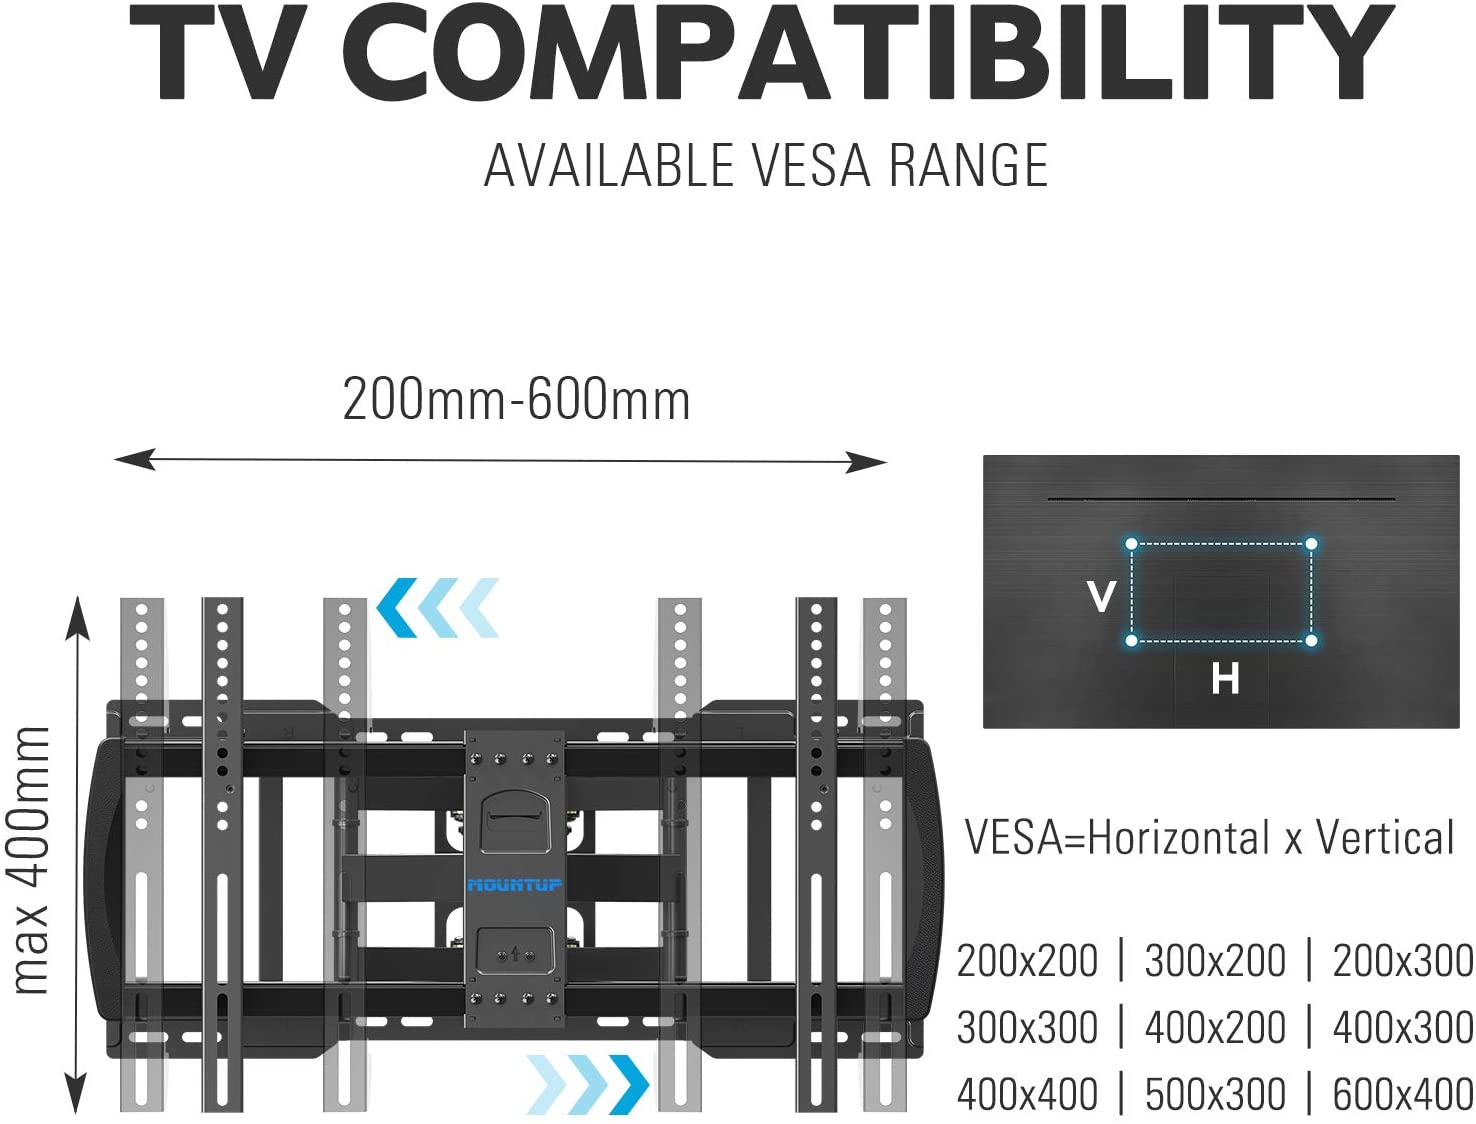 70 inch TV wall mount is compatible with VESA up to 600×400 mm